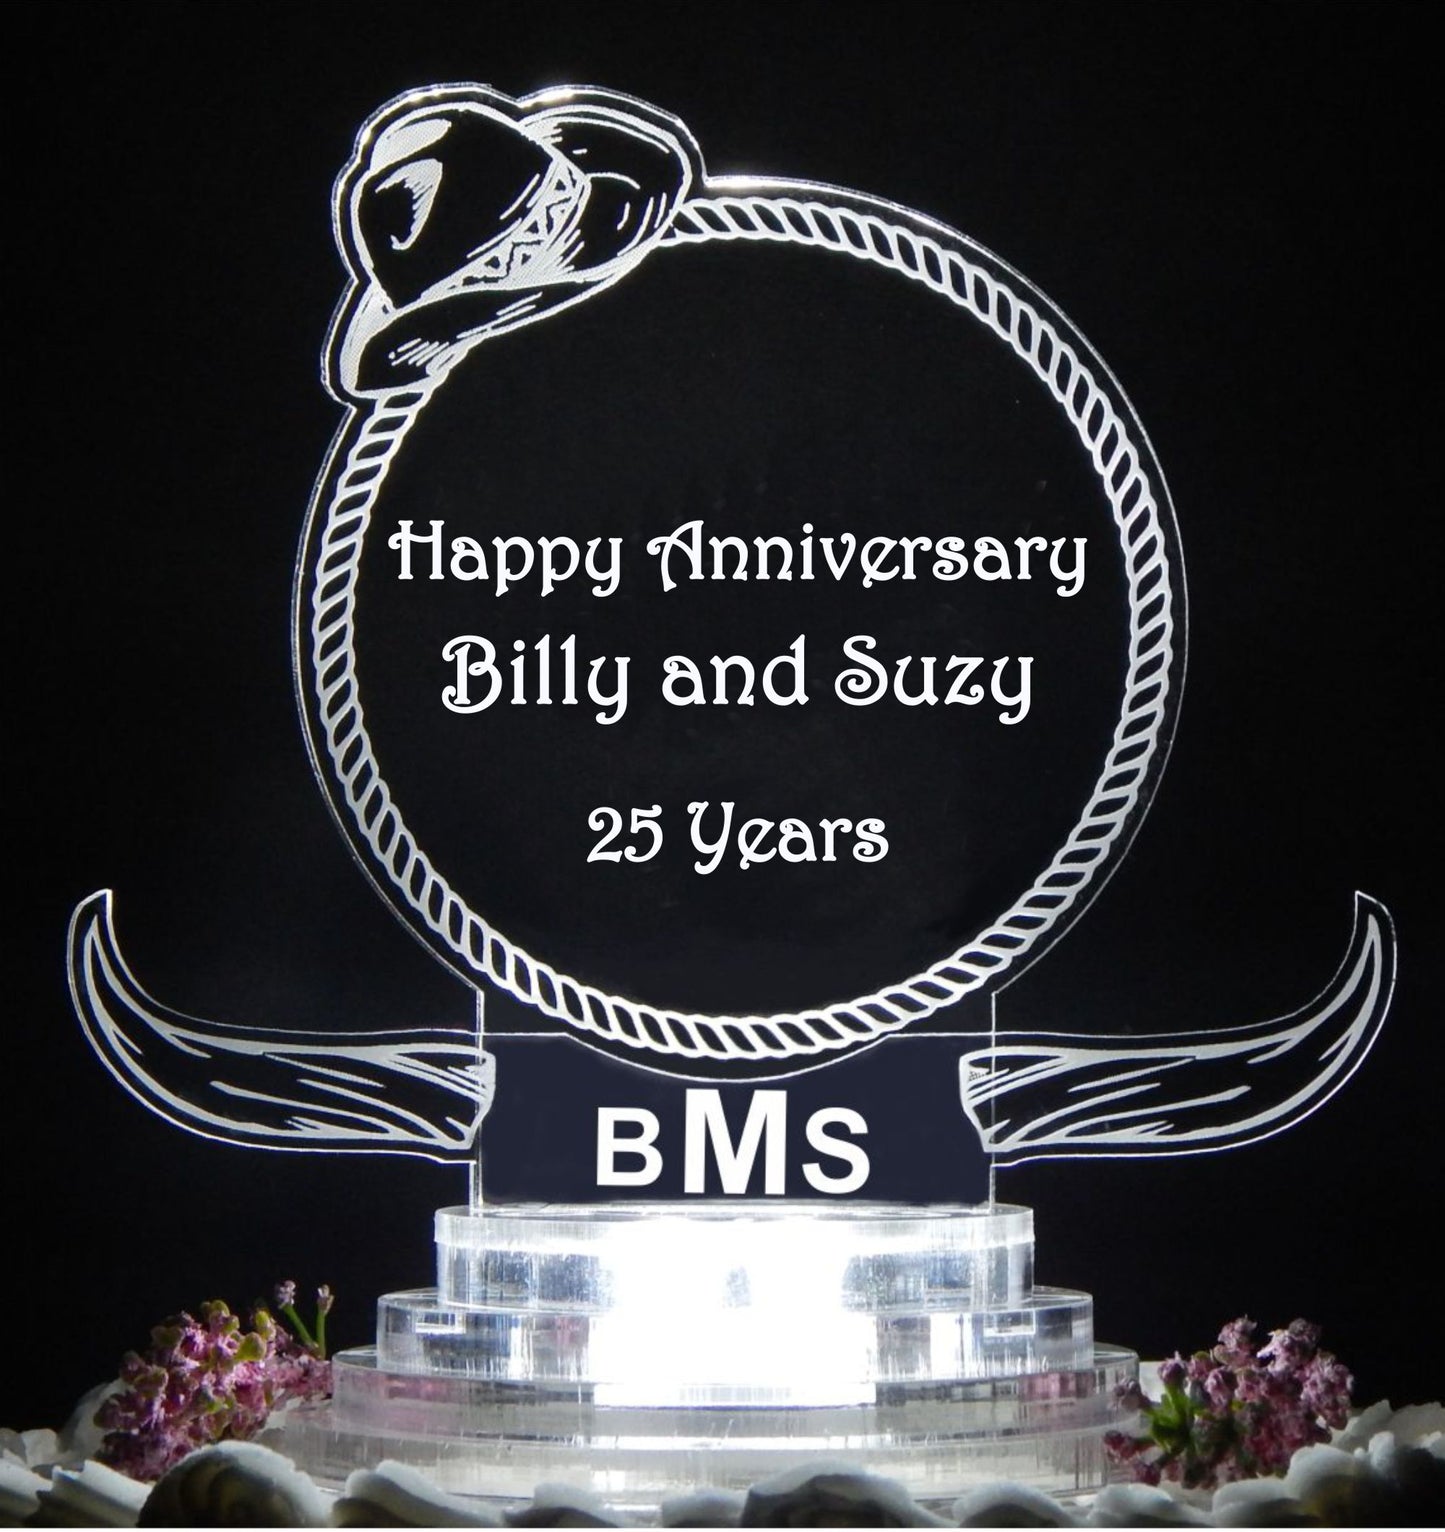 clear acrylic cake topper designed in a western cowboy theme with steer horns and cowboy hat, engraved with names and Happy Anniversary